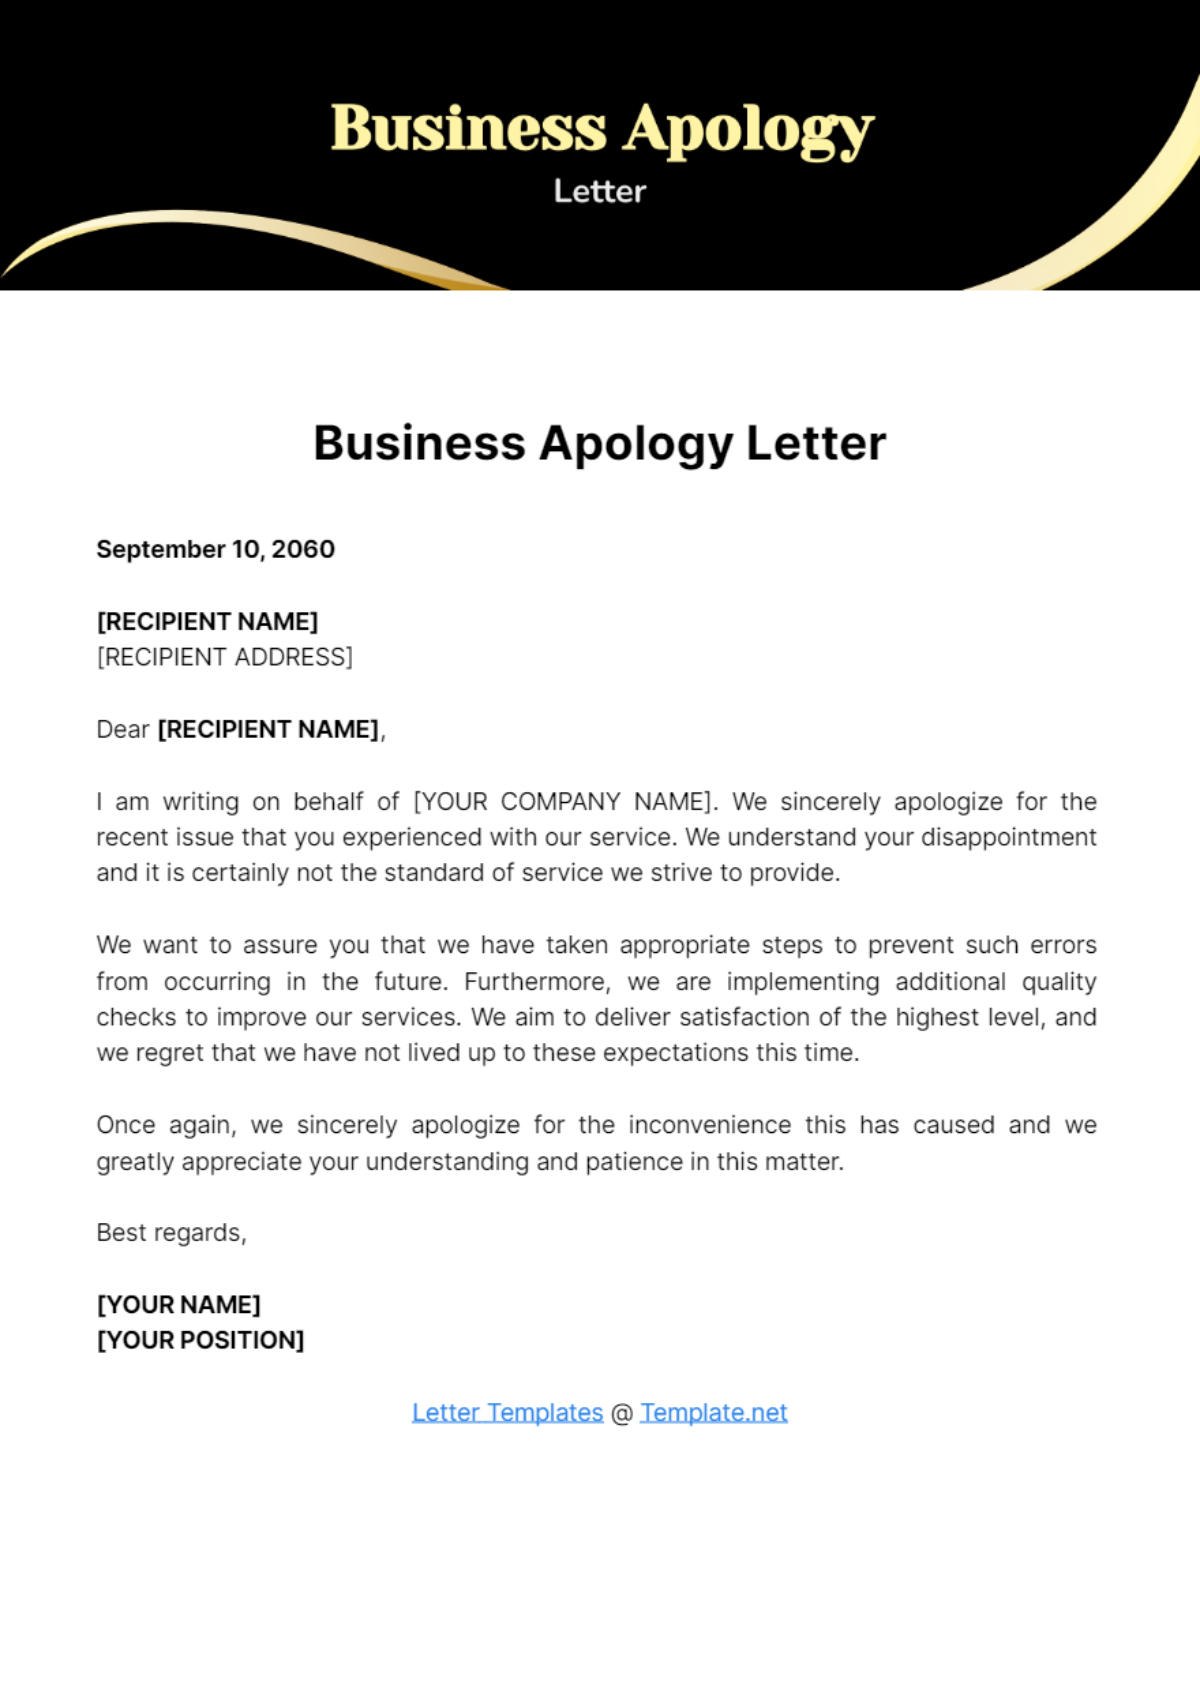 Free Business Apology Letter Template